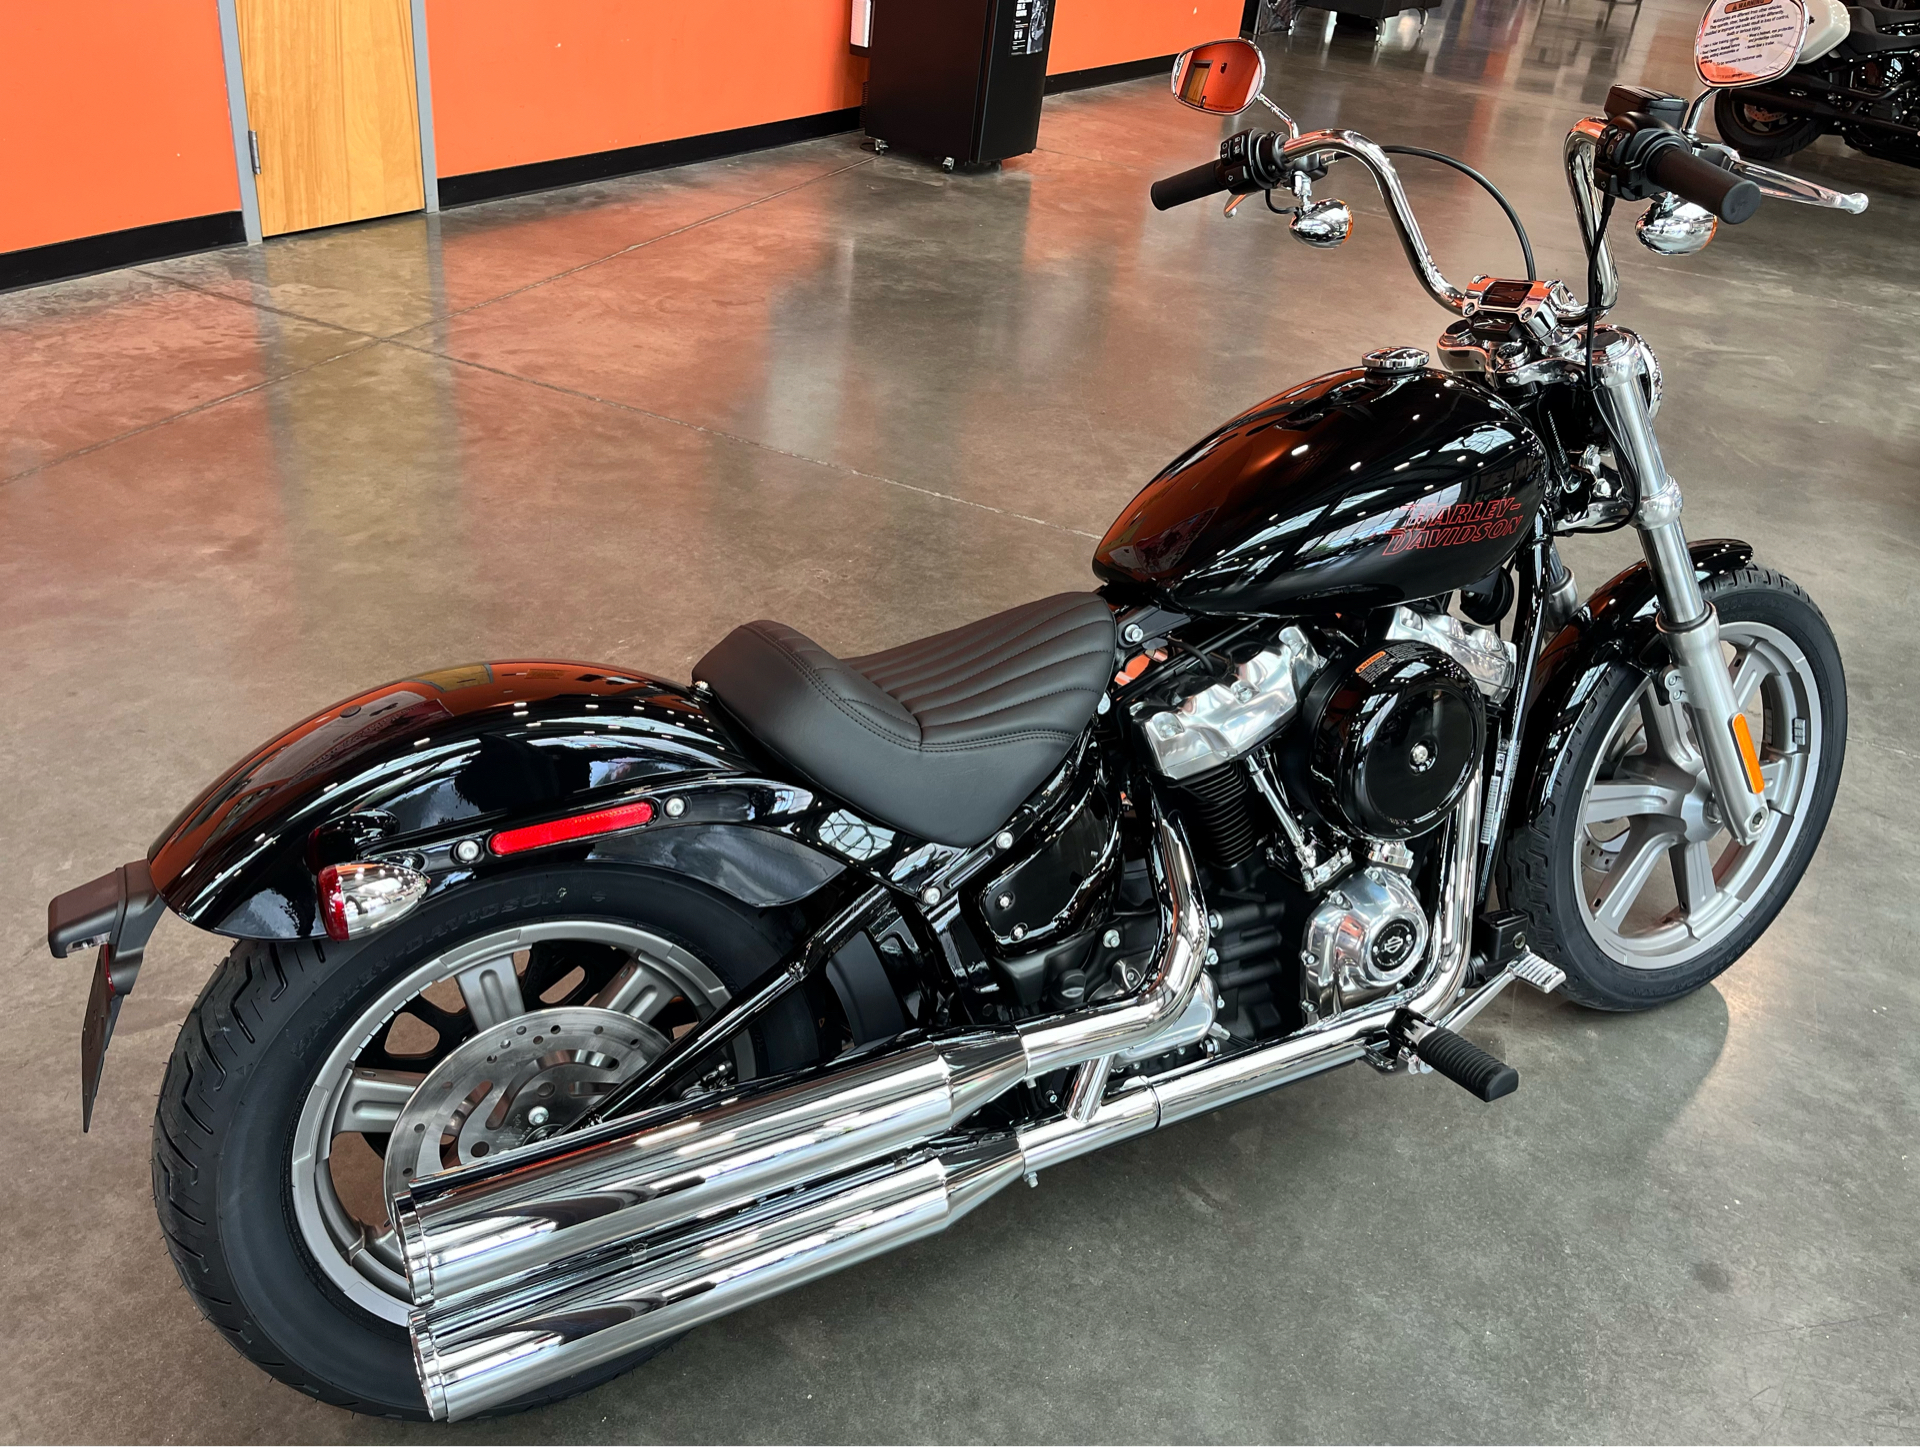 2023 Harley-Davidson Softail Standard in Columbia, Tennessee - Photo 3